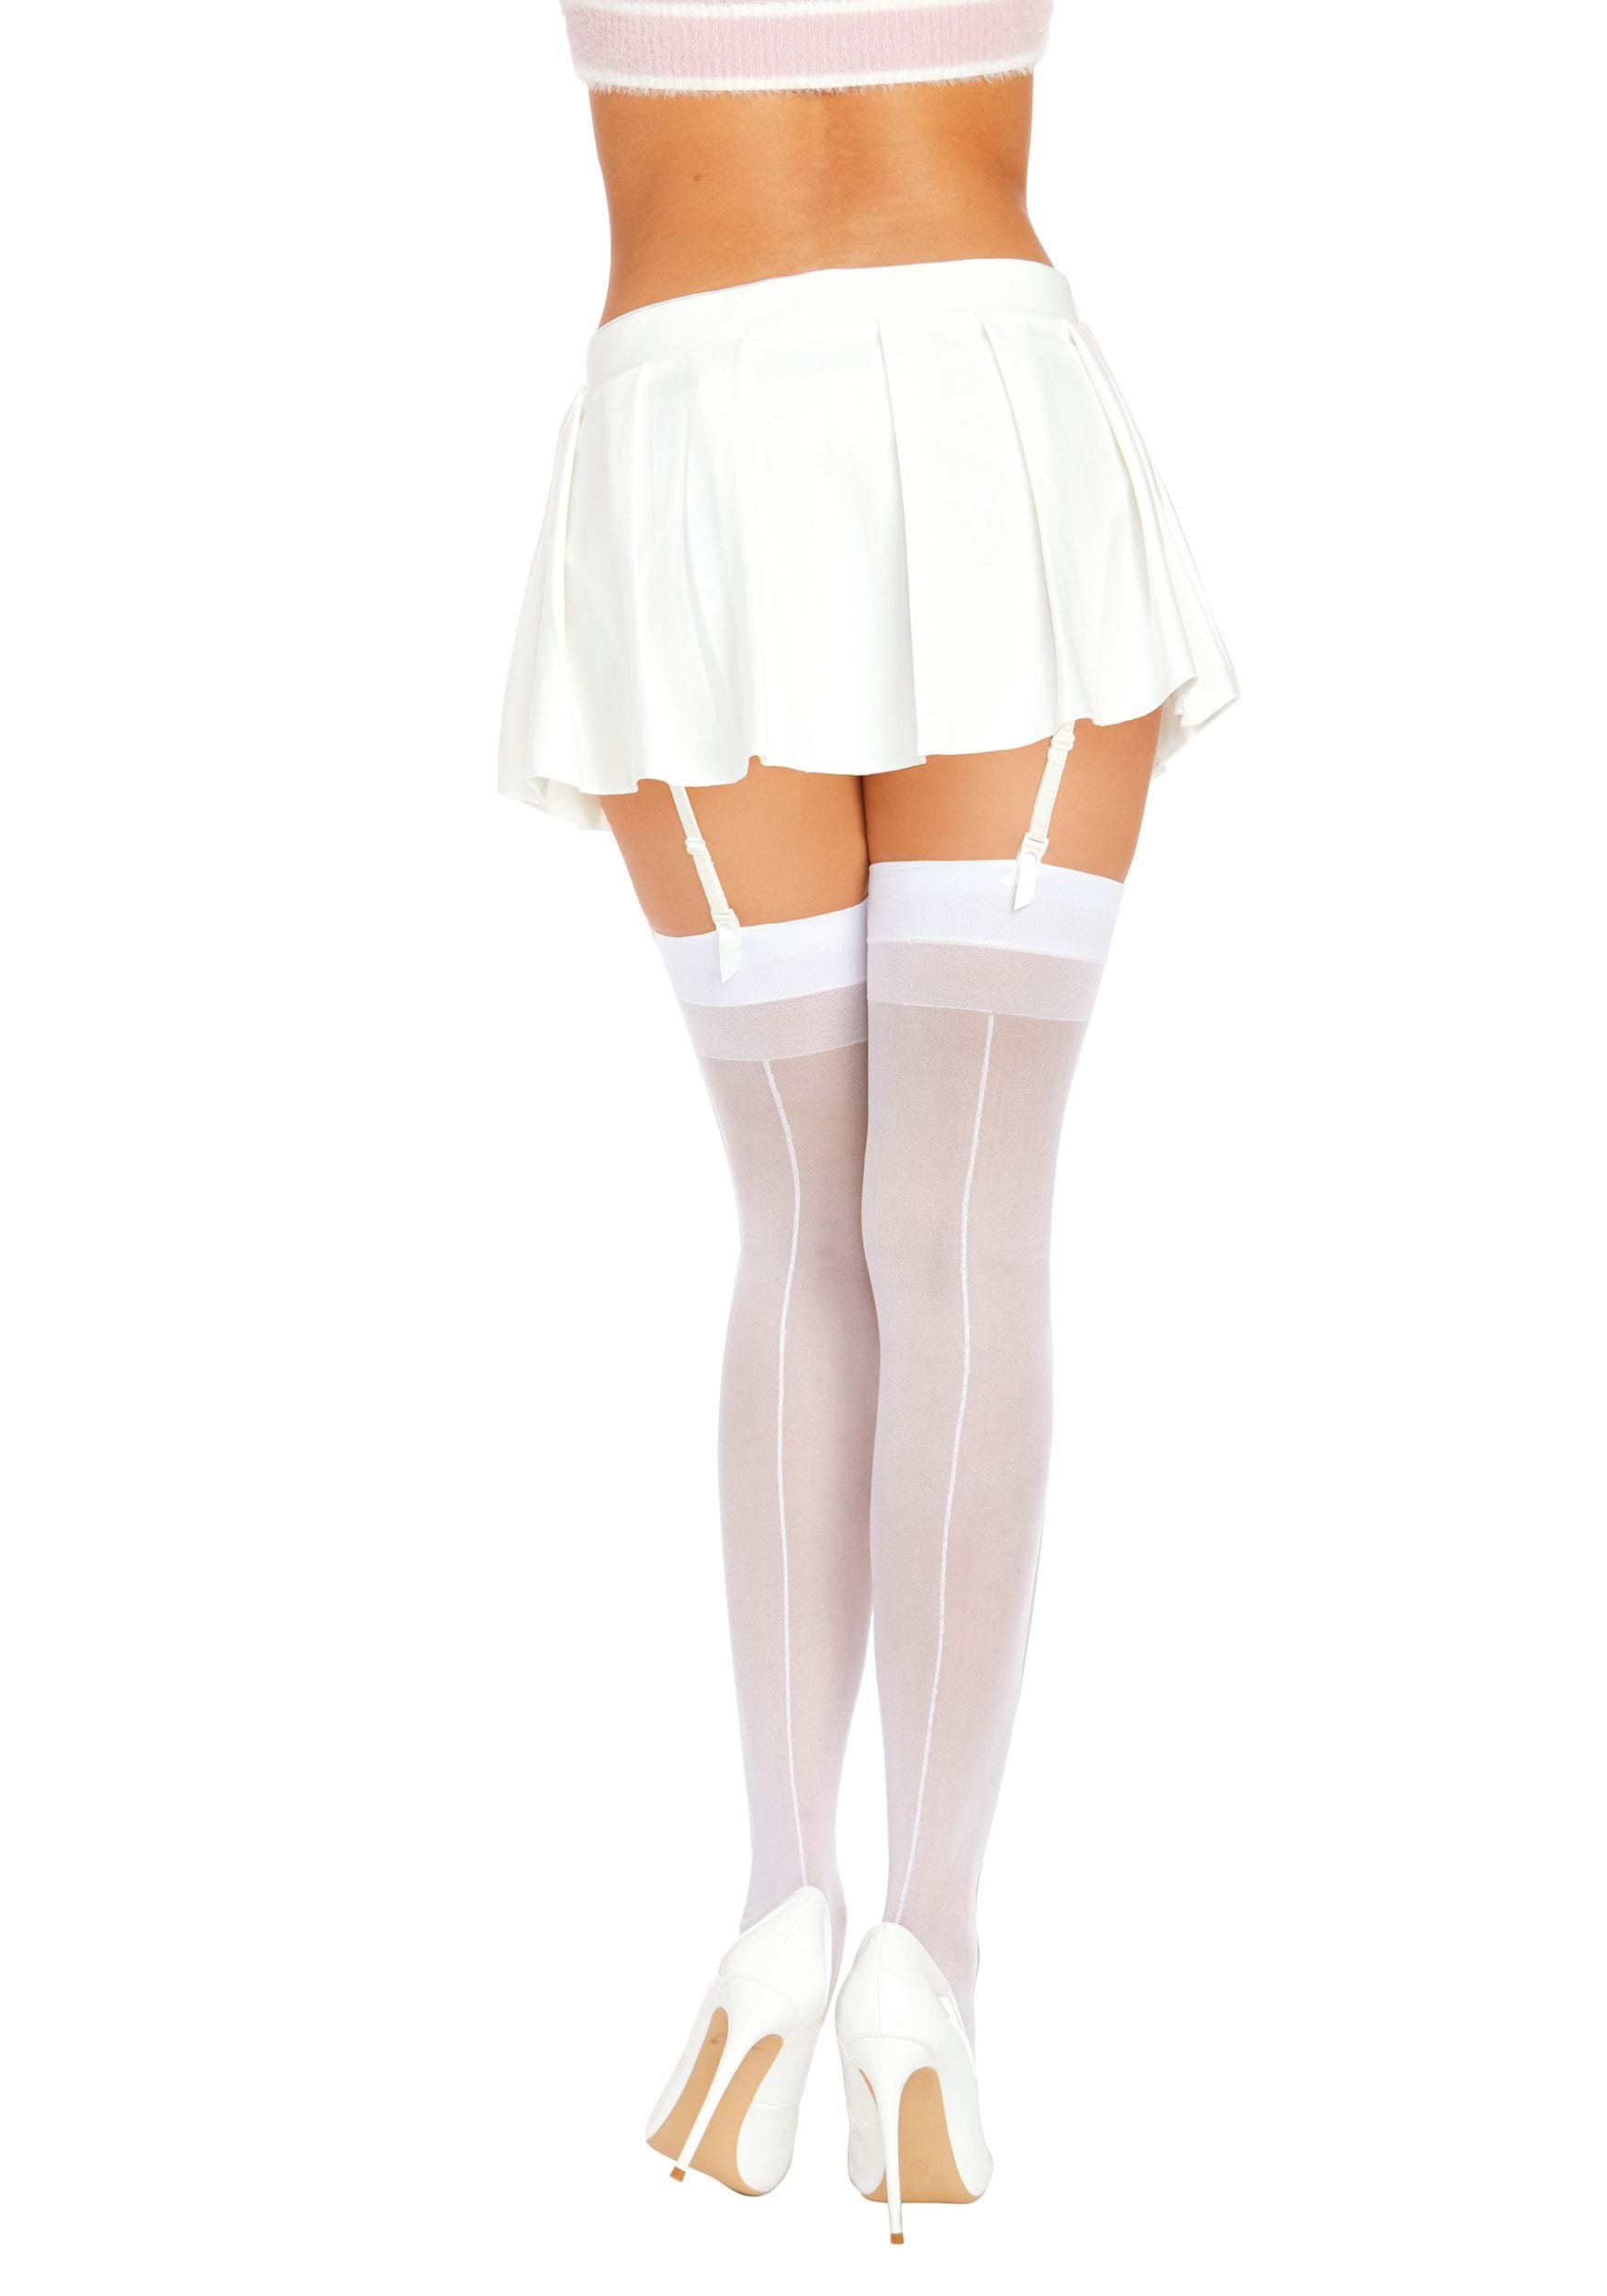 White Sheer Thigh High Stockings With Back Seam For Adults